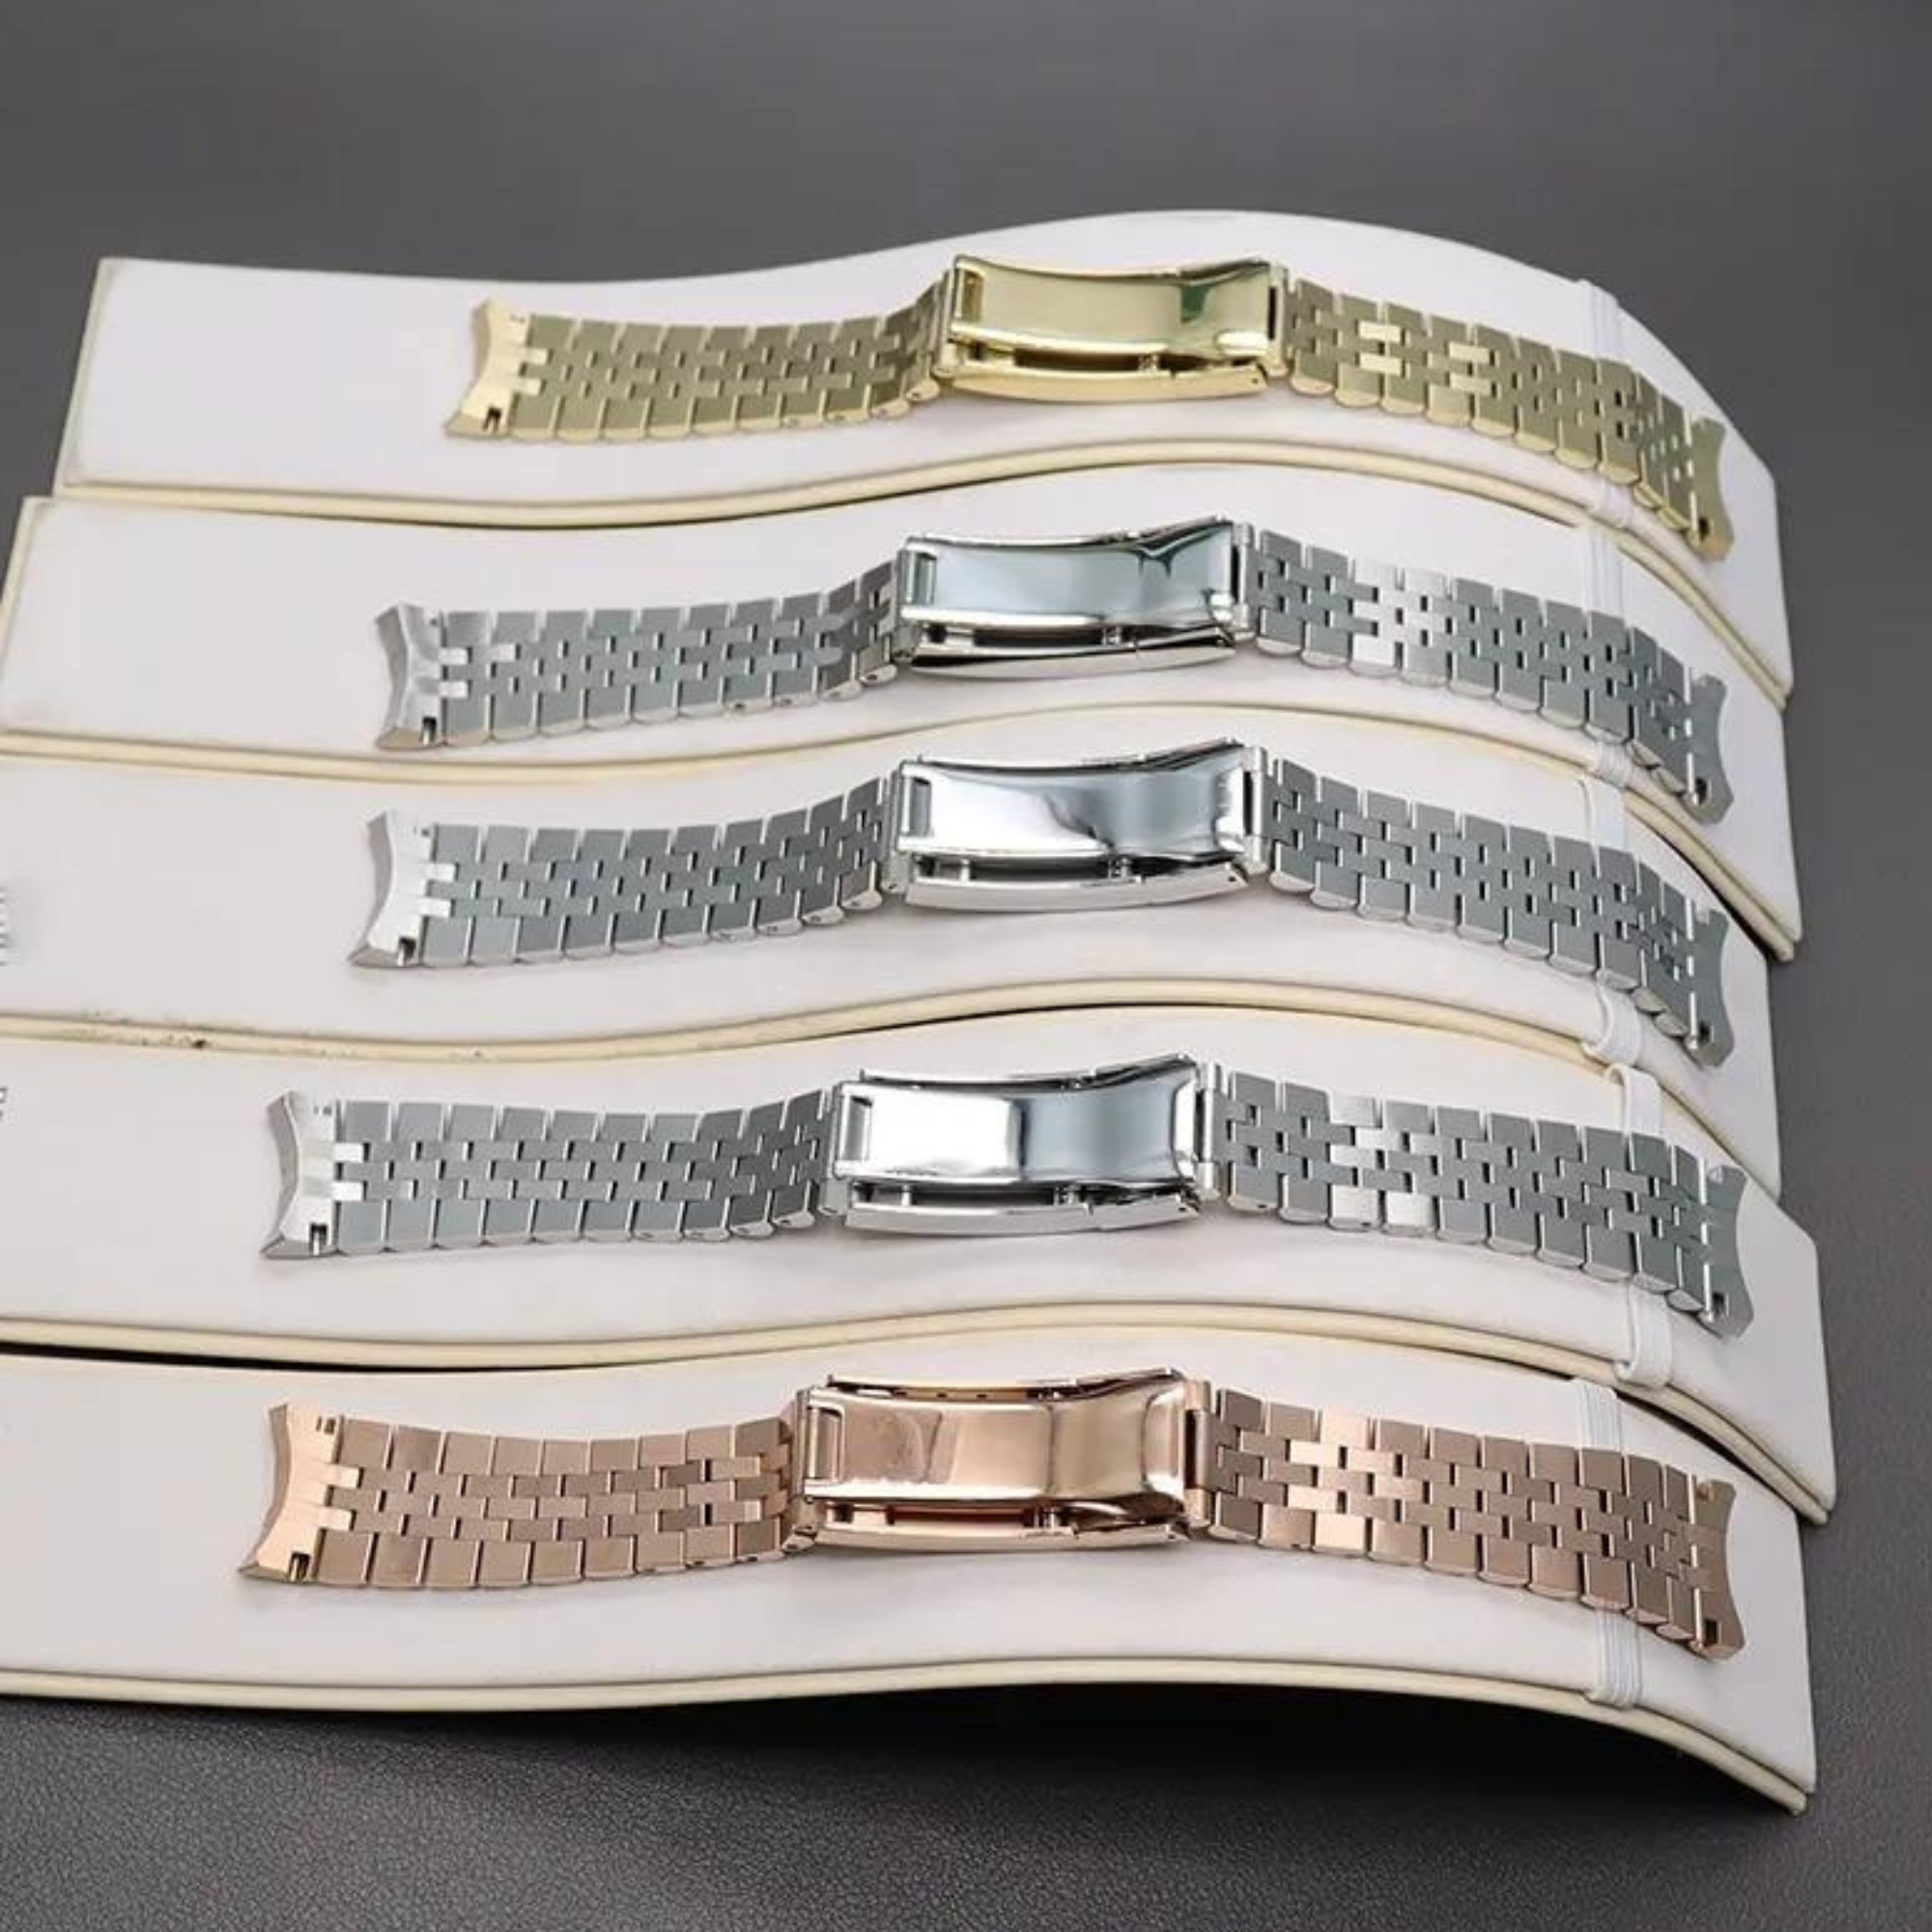 Stainless Steel Stainless Steel Watch Strap With Silver Security Buckle 20mm,  22mm, 24mm Wrist Bracelet With 3 Beads And Pins 230921 From Yujia05, $9.13  | DHgate.Com